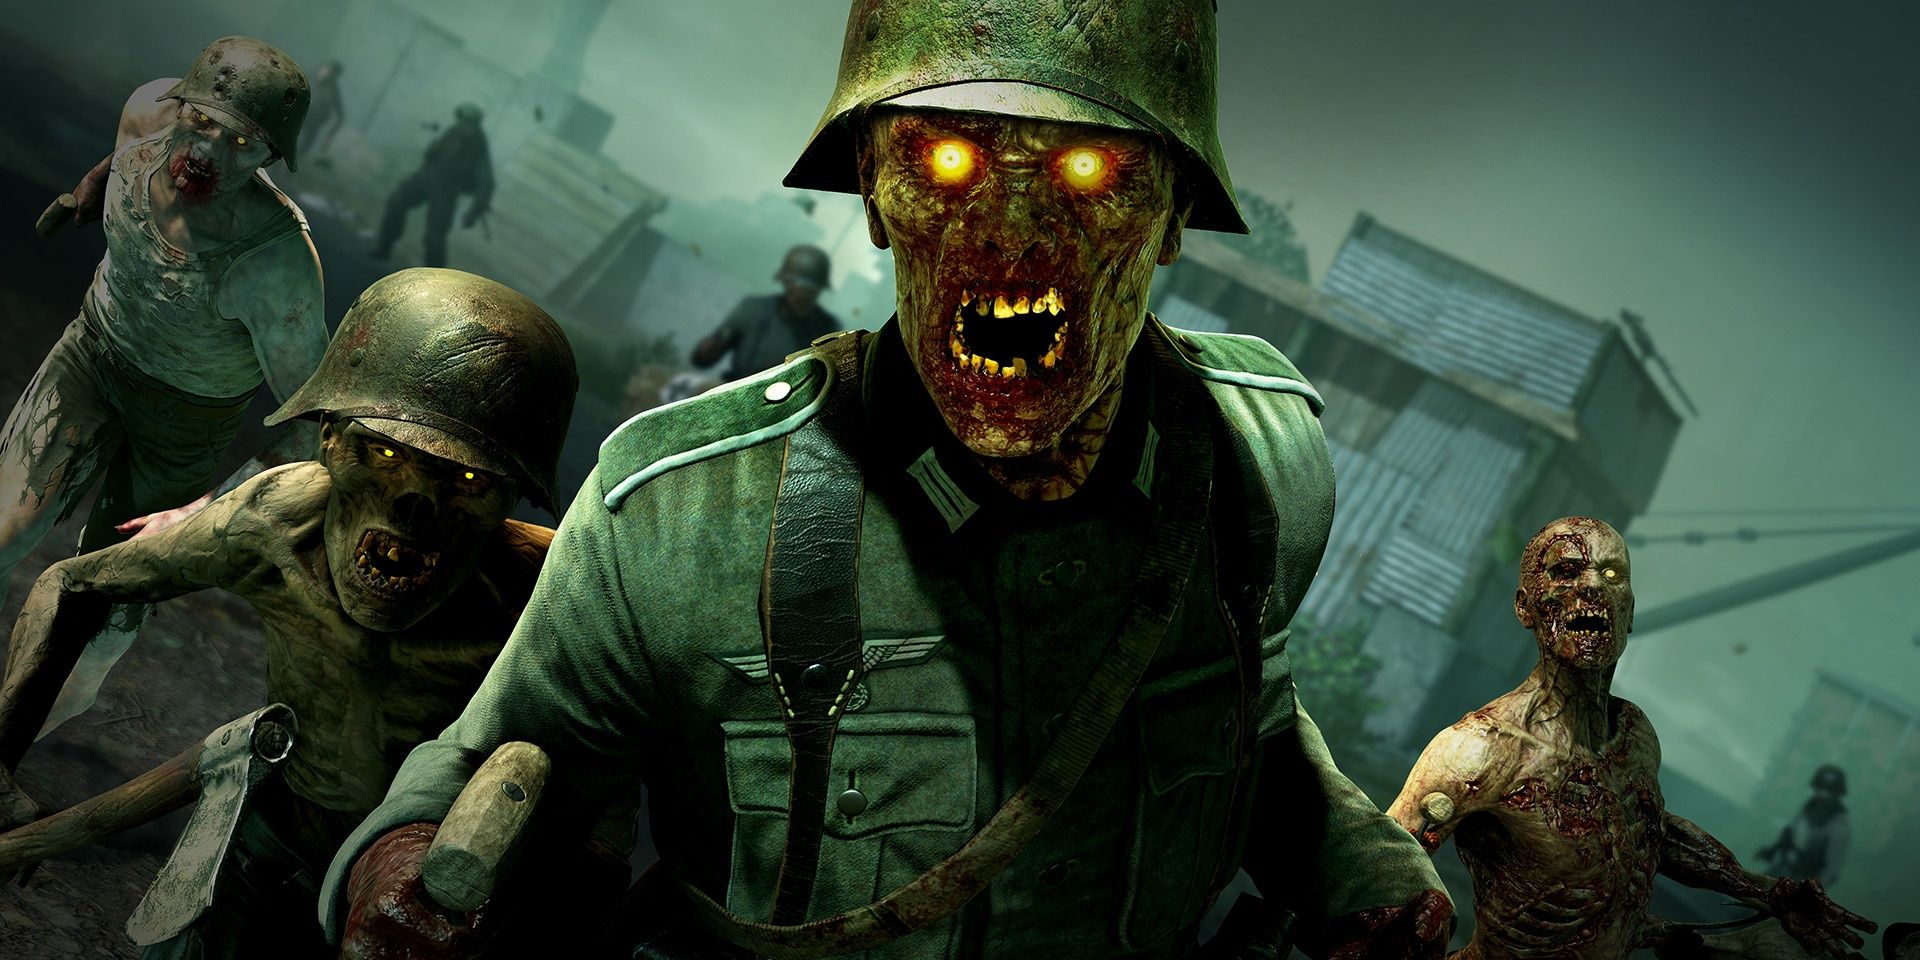 A screenshot showing a zombie officer and some grunts in Zombie Army 4: Dead War